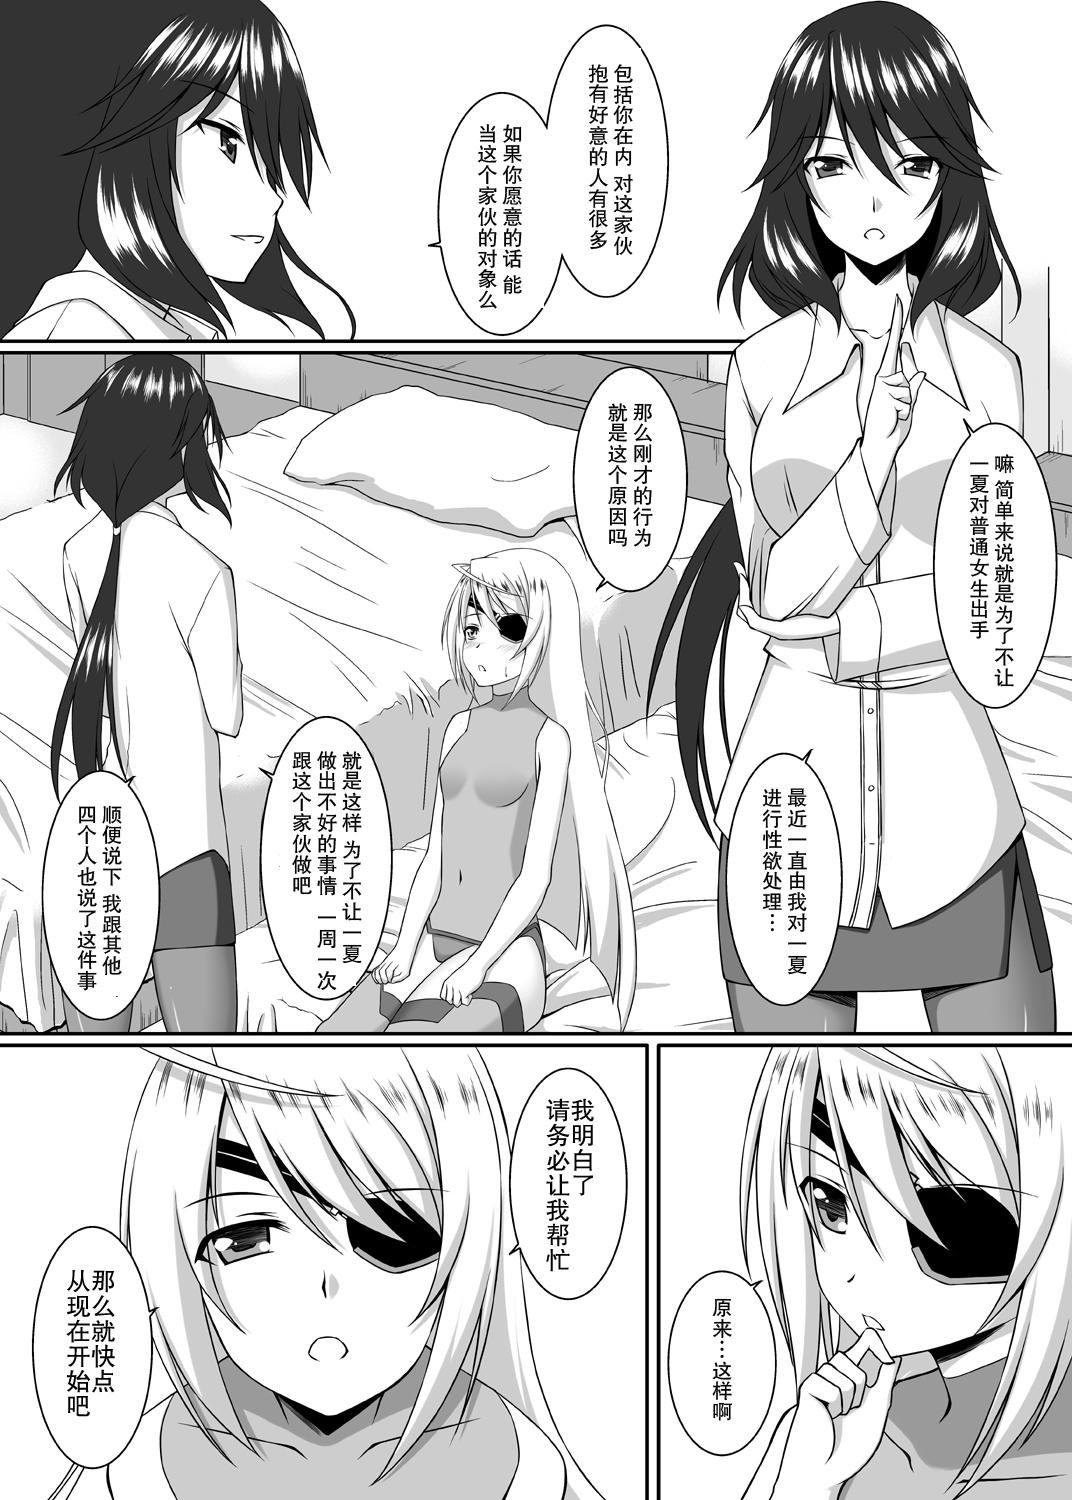 She Snow Thaw - Infinite stratos Tit - Page 10